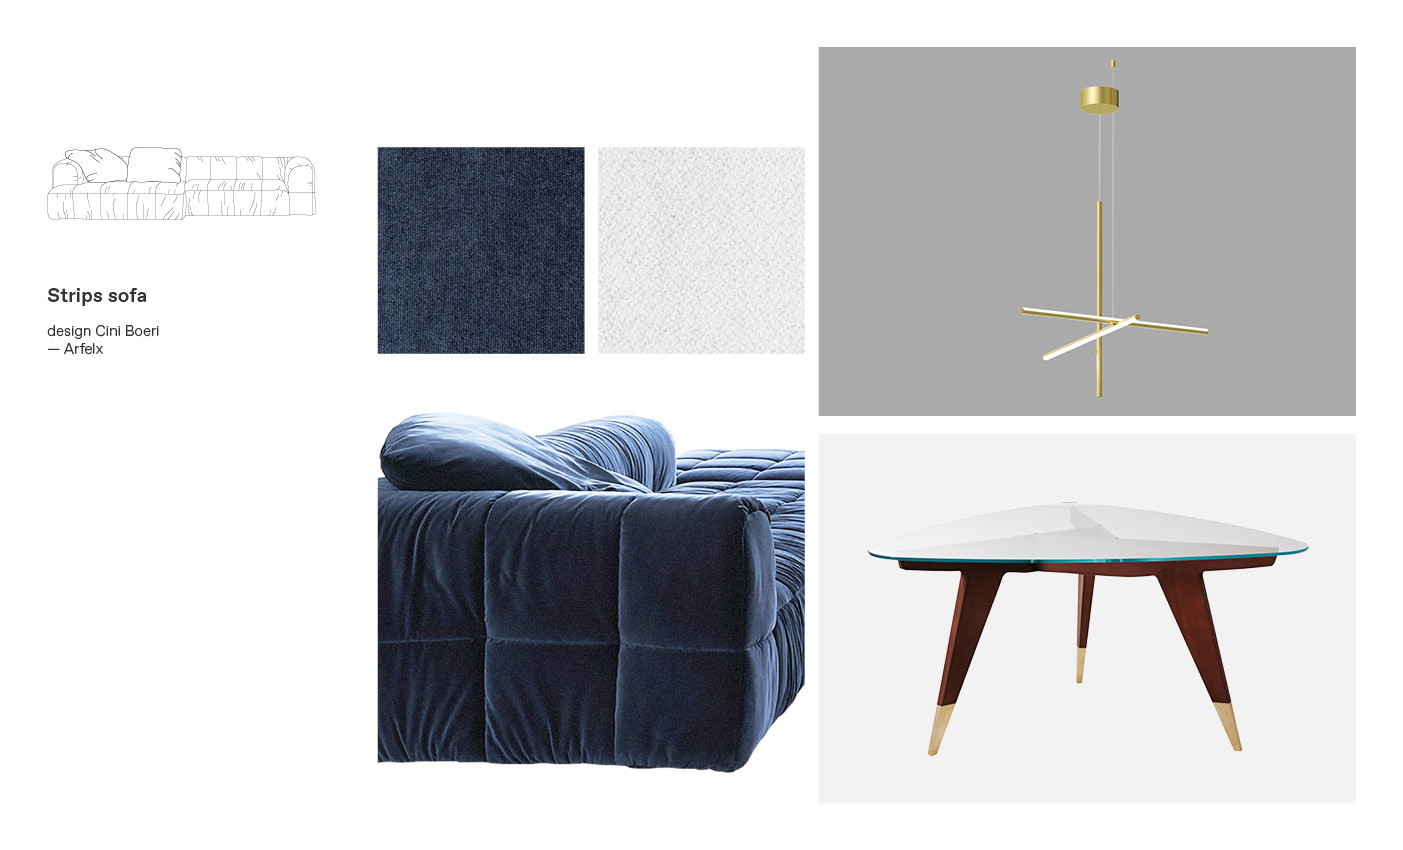 Arflex sofas and Strips moodboard composition